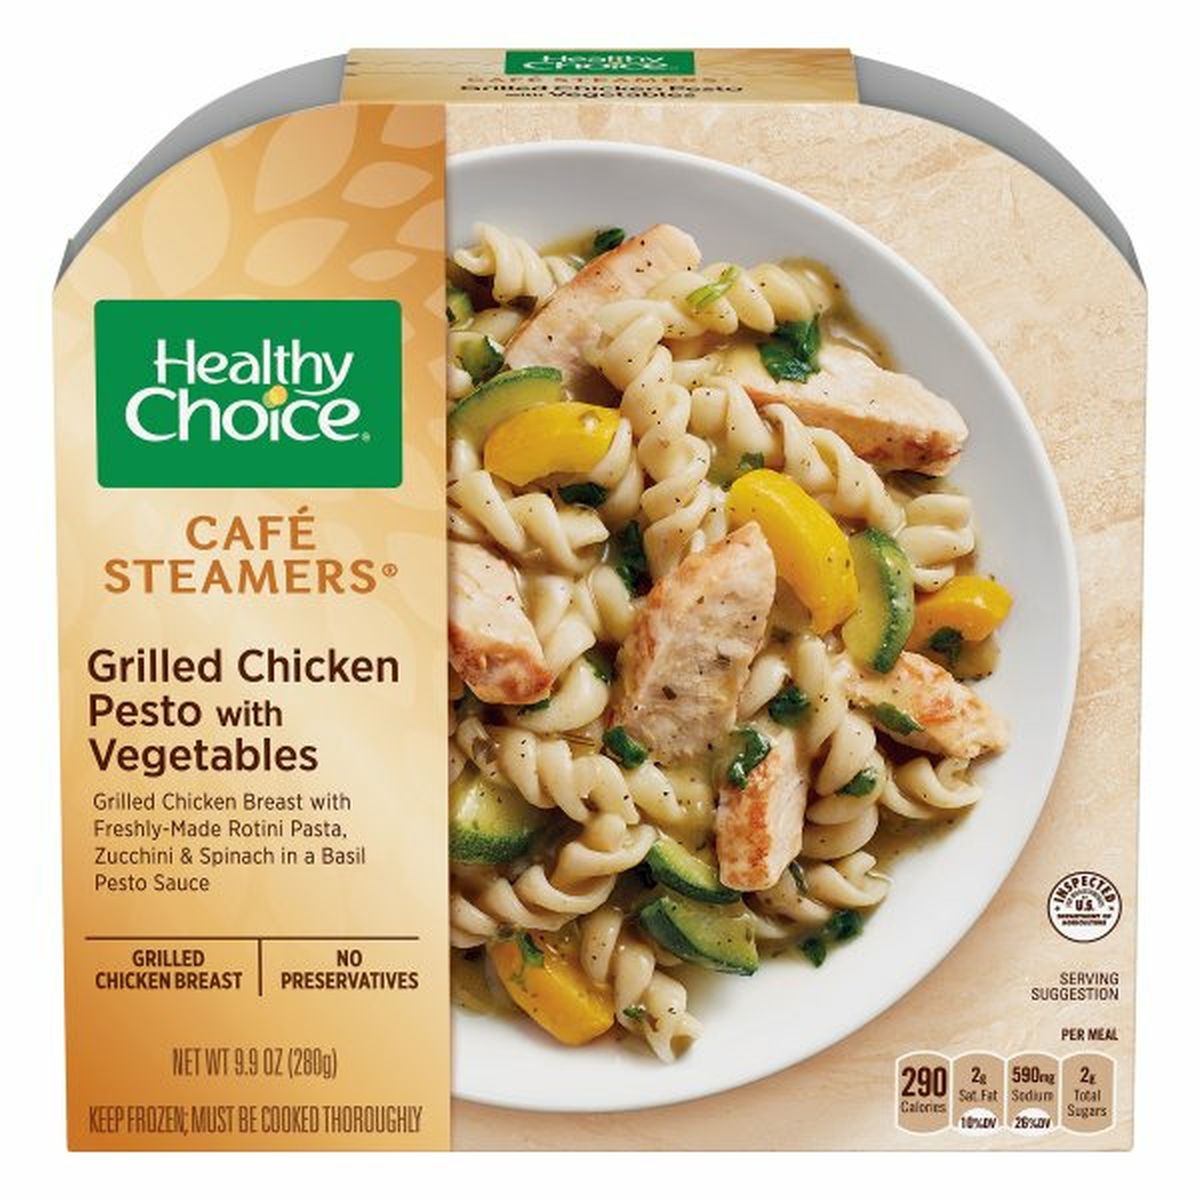 Calories in Healthy Choice Cafe Steamers Grilled Chicken Pesto with Vegetables